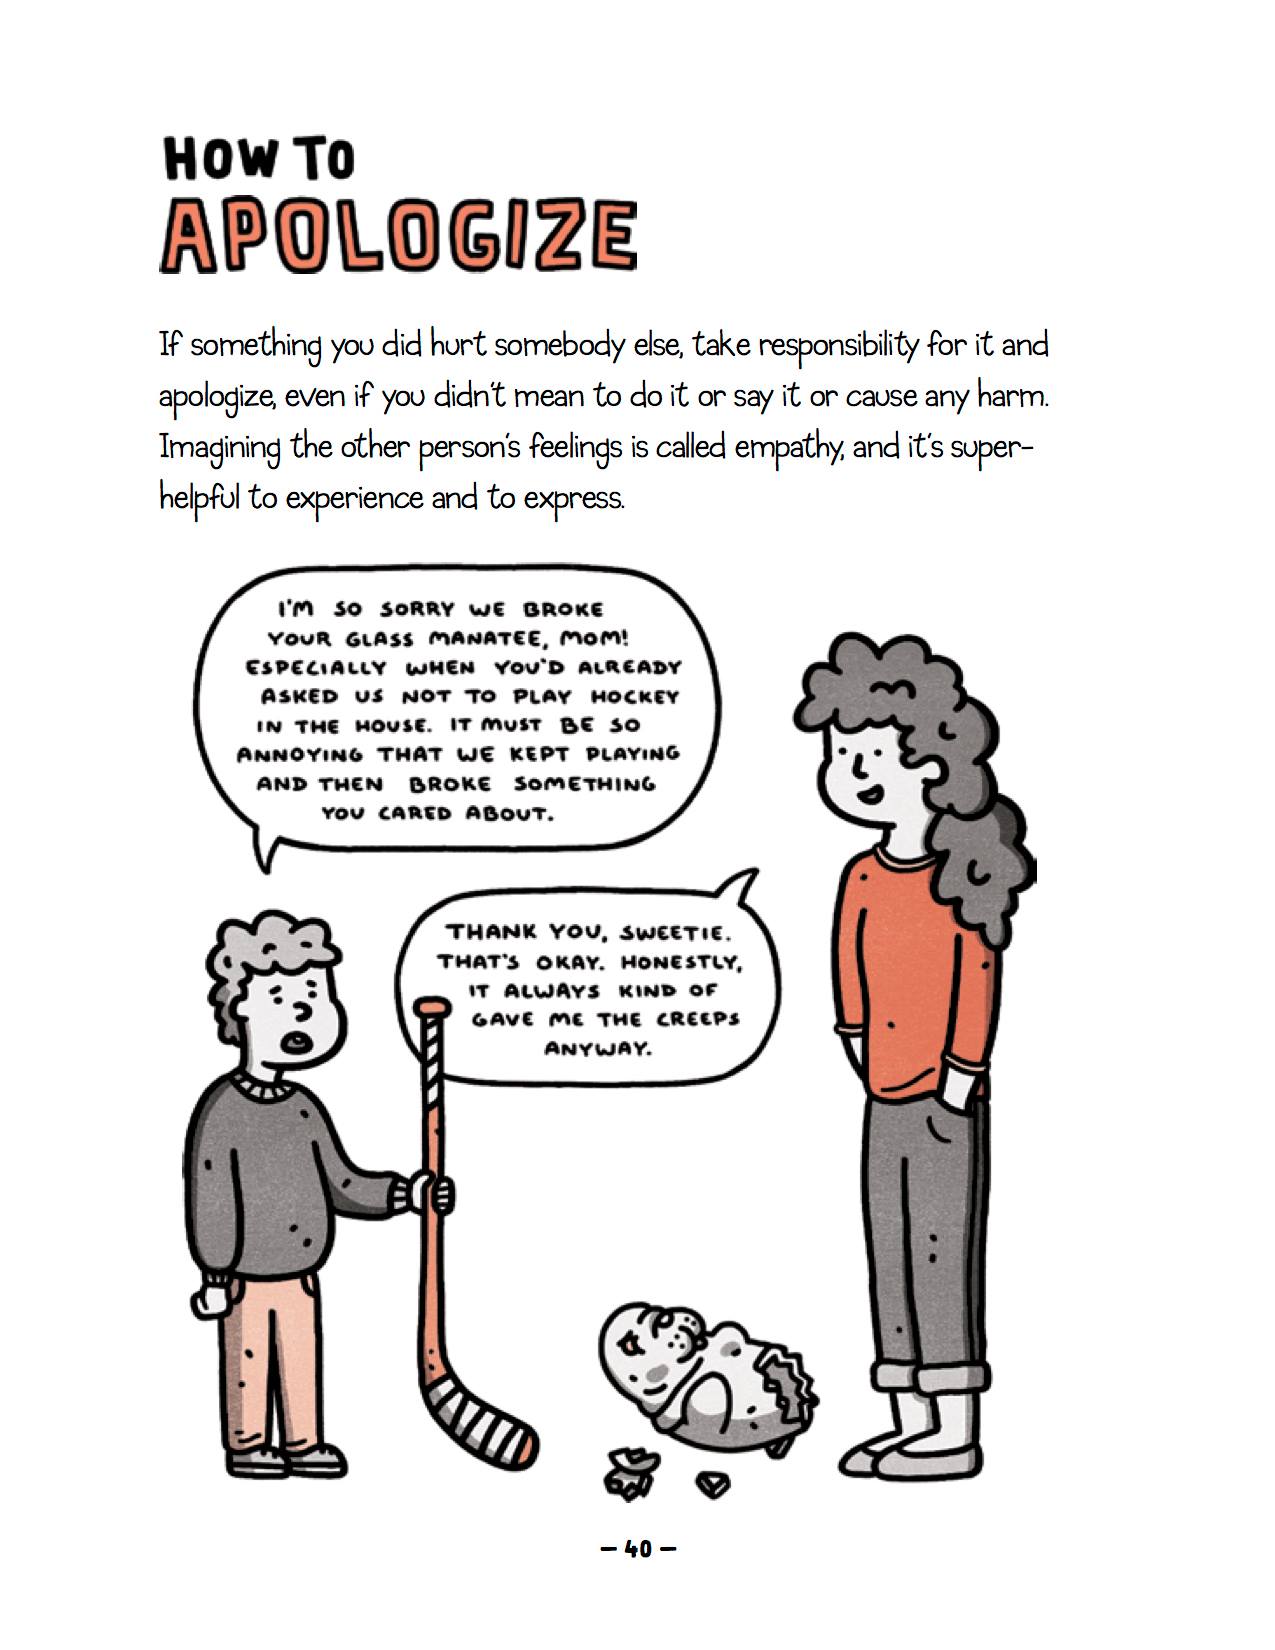 How to apologize (you know, for kids!)